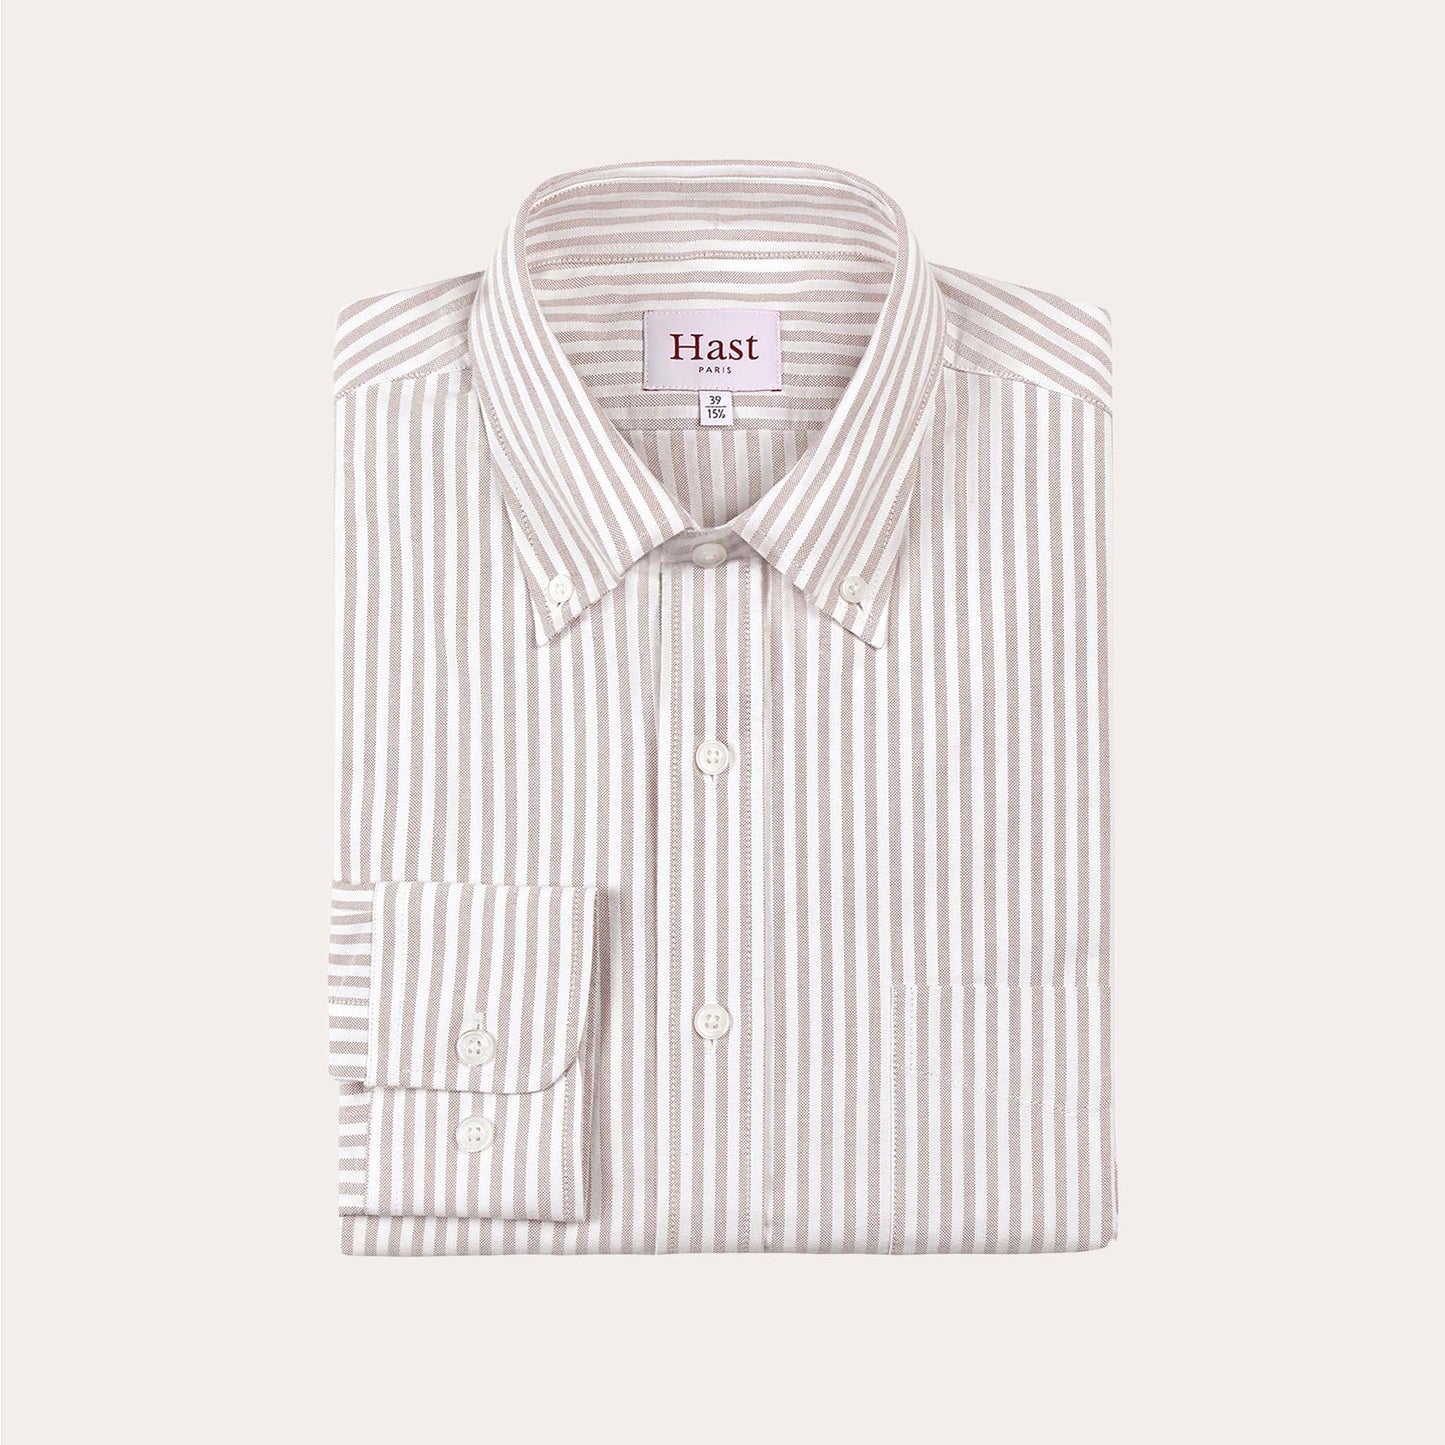 Organic cotton shirt with beige and white stripes